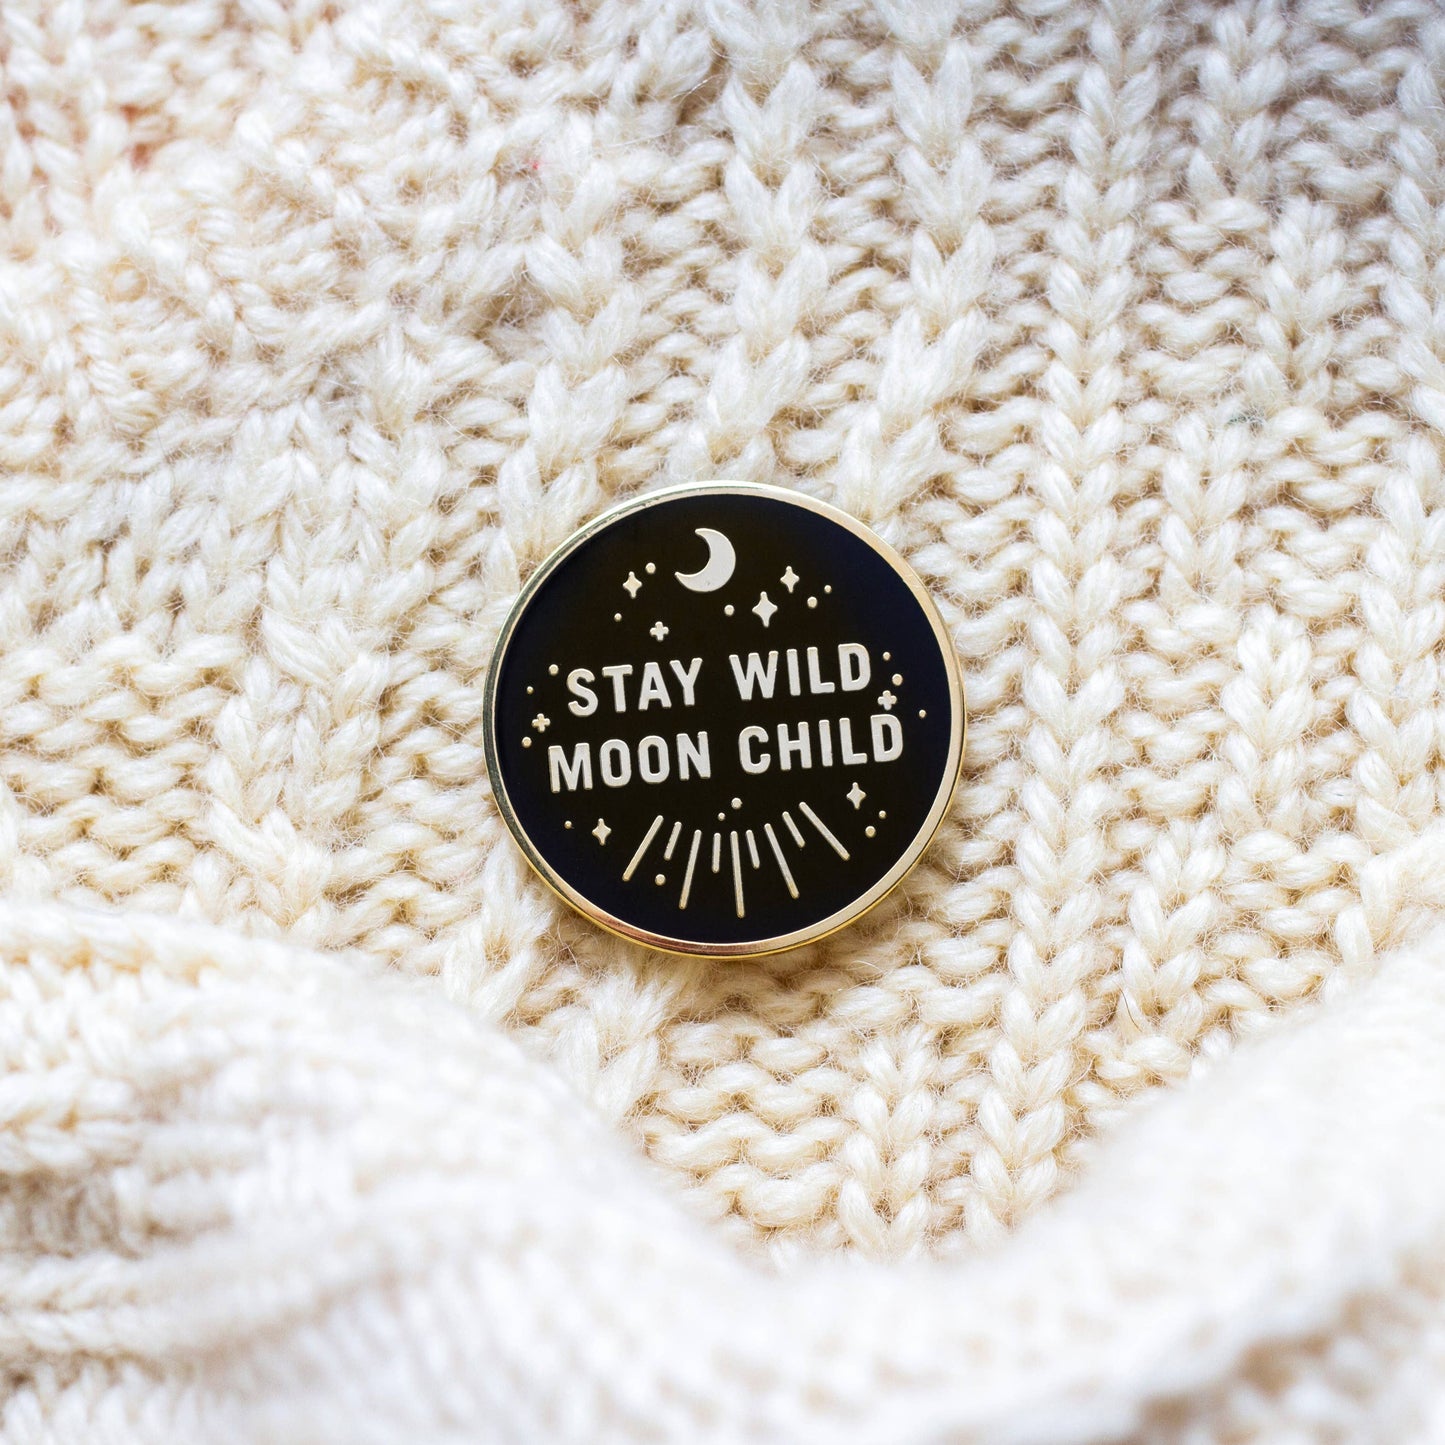 Stay Wild Moon Child Enamel Pin - Storm and Sky Shoppe